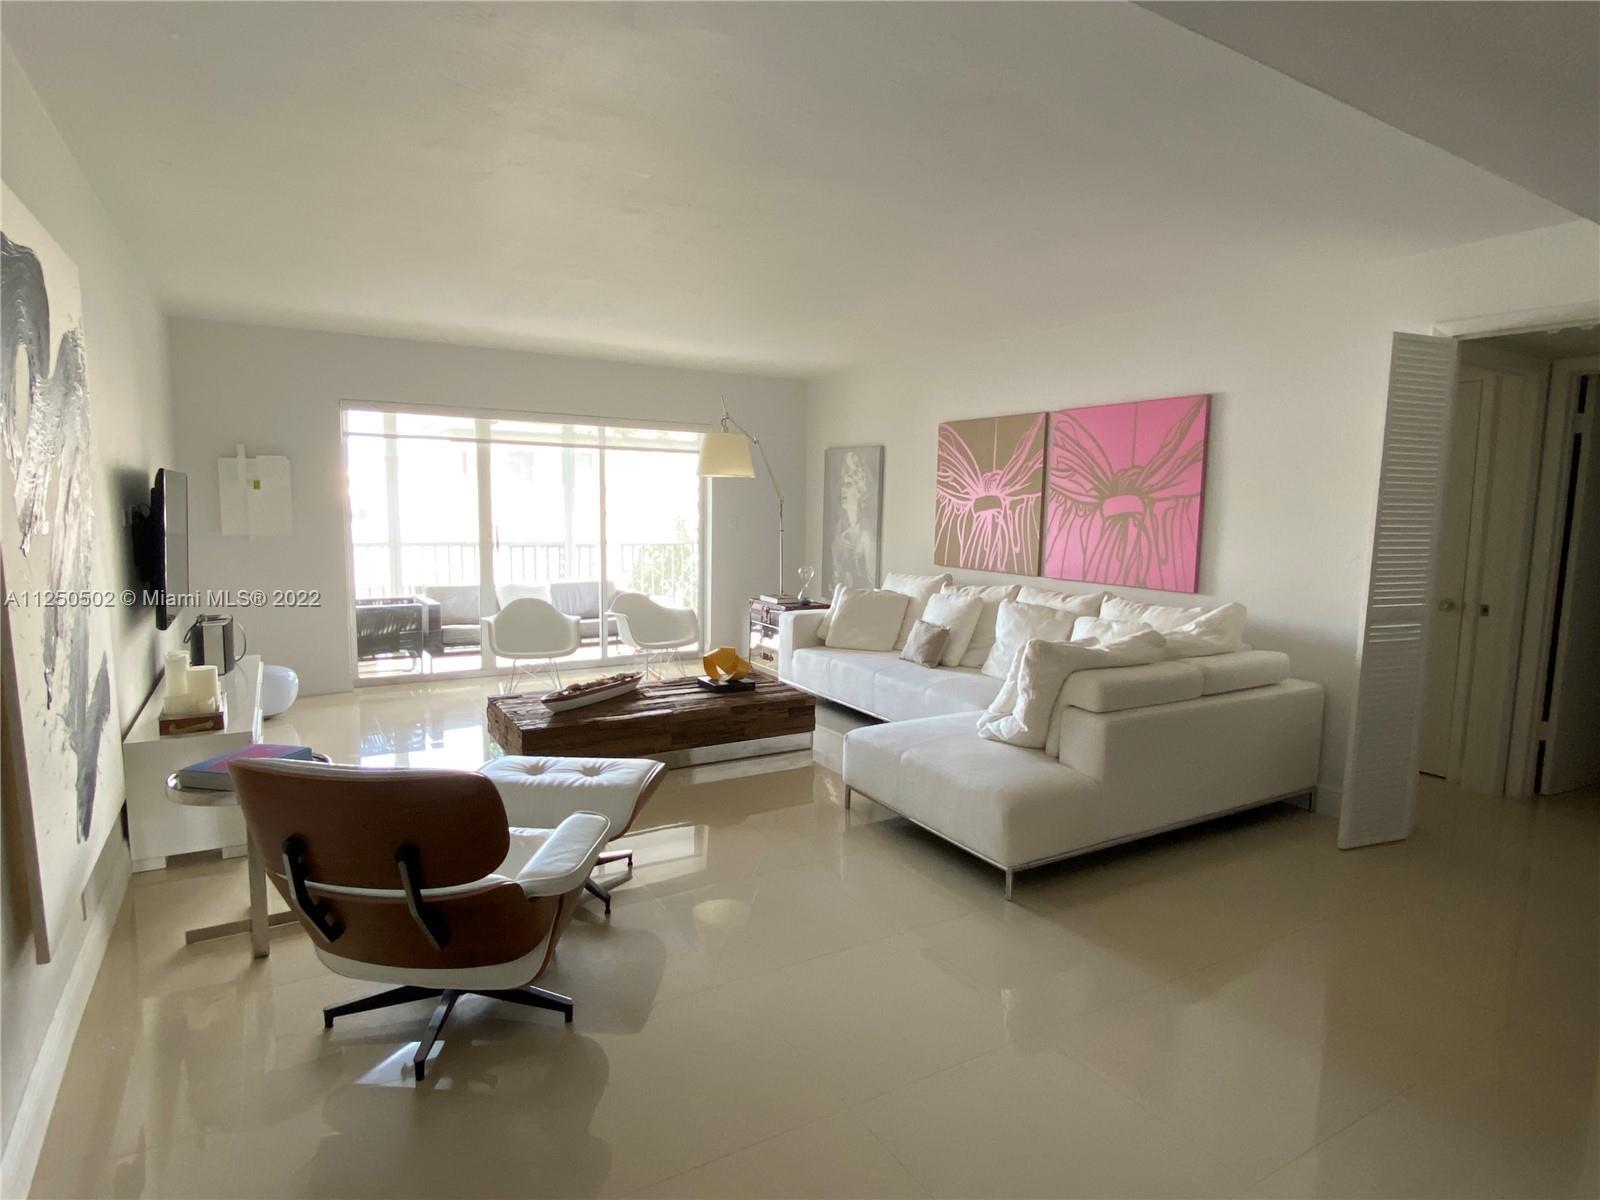 Beautiful 2/2 renovated apartment situated in the beautiful neighborhood of  Bal Harbour, this build